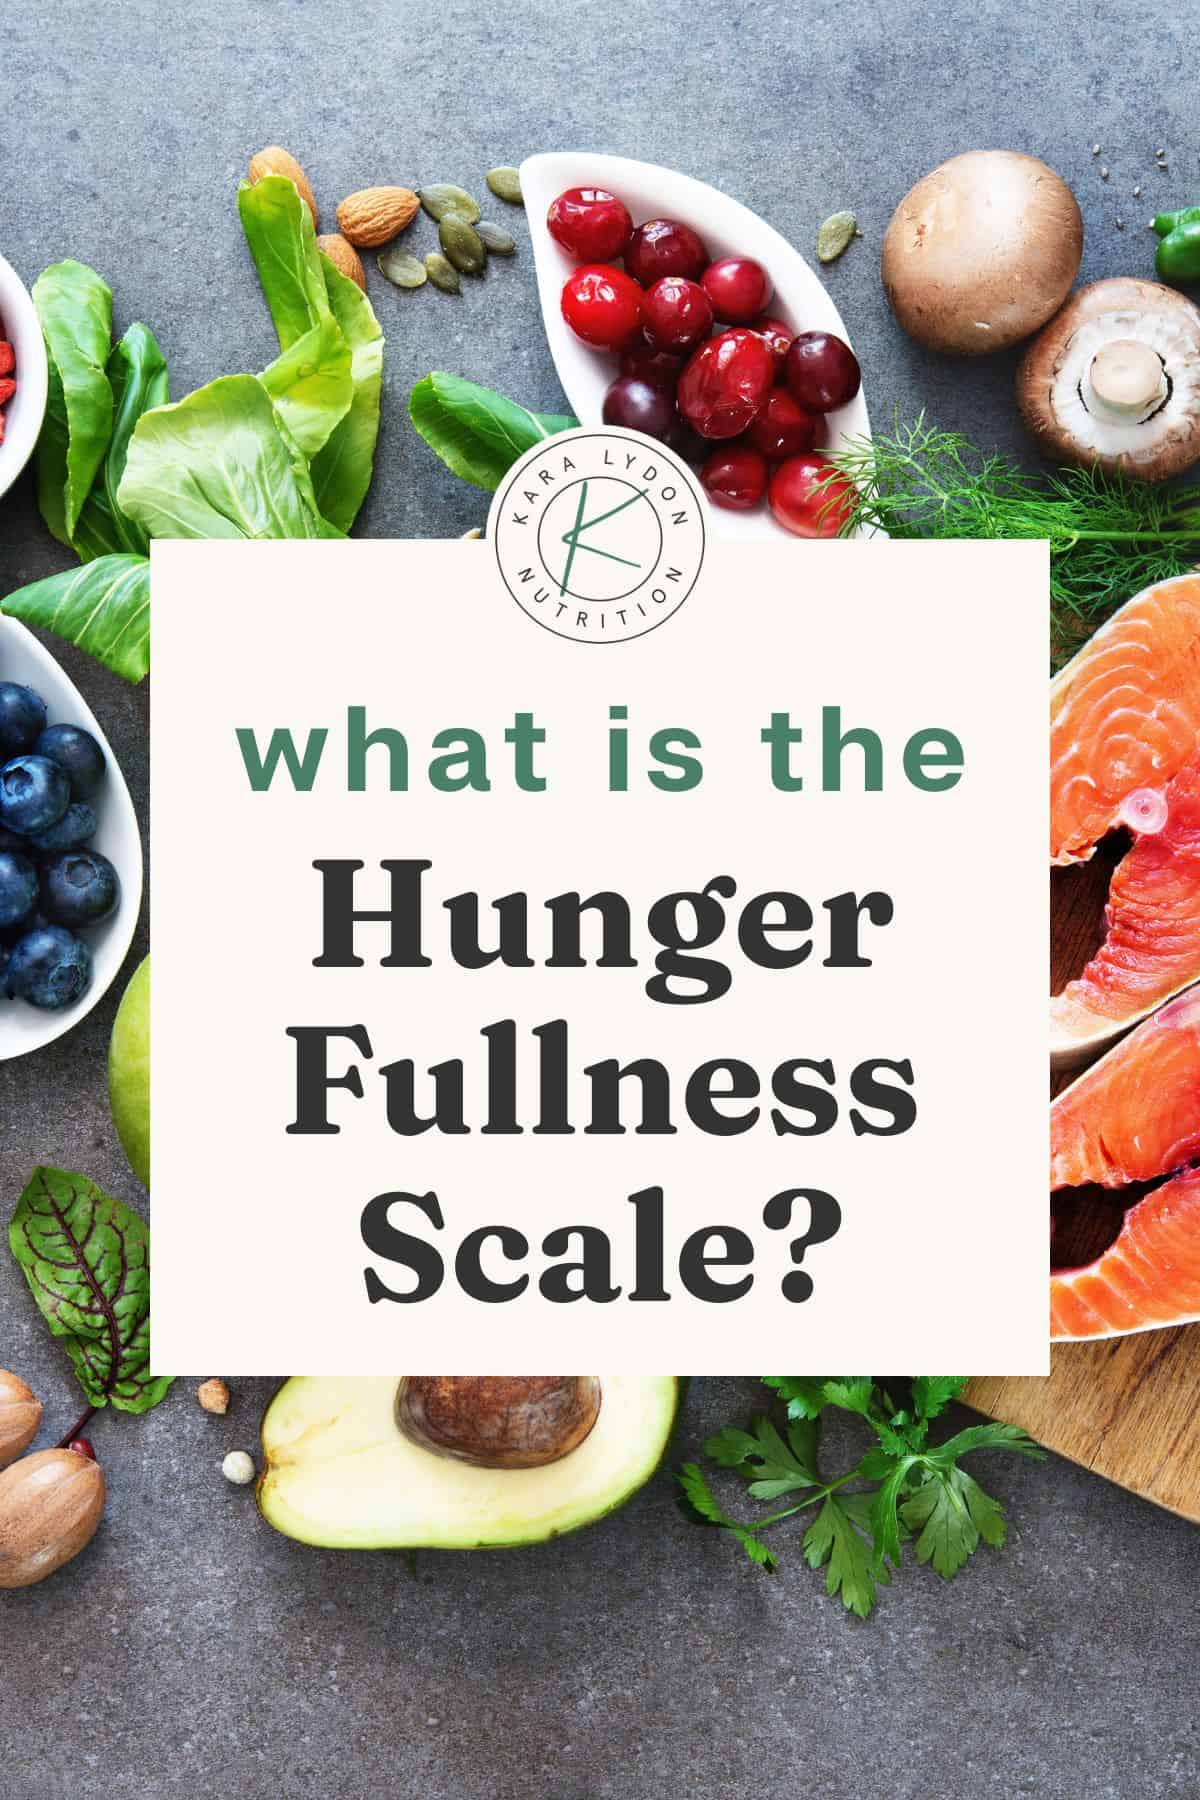 What is the hunger fullness scale?